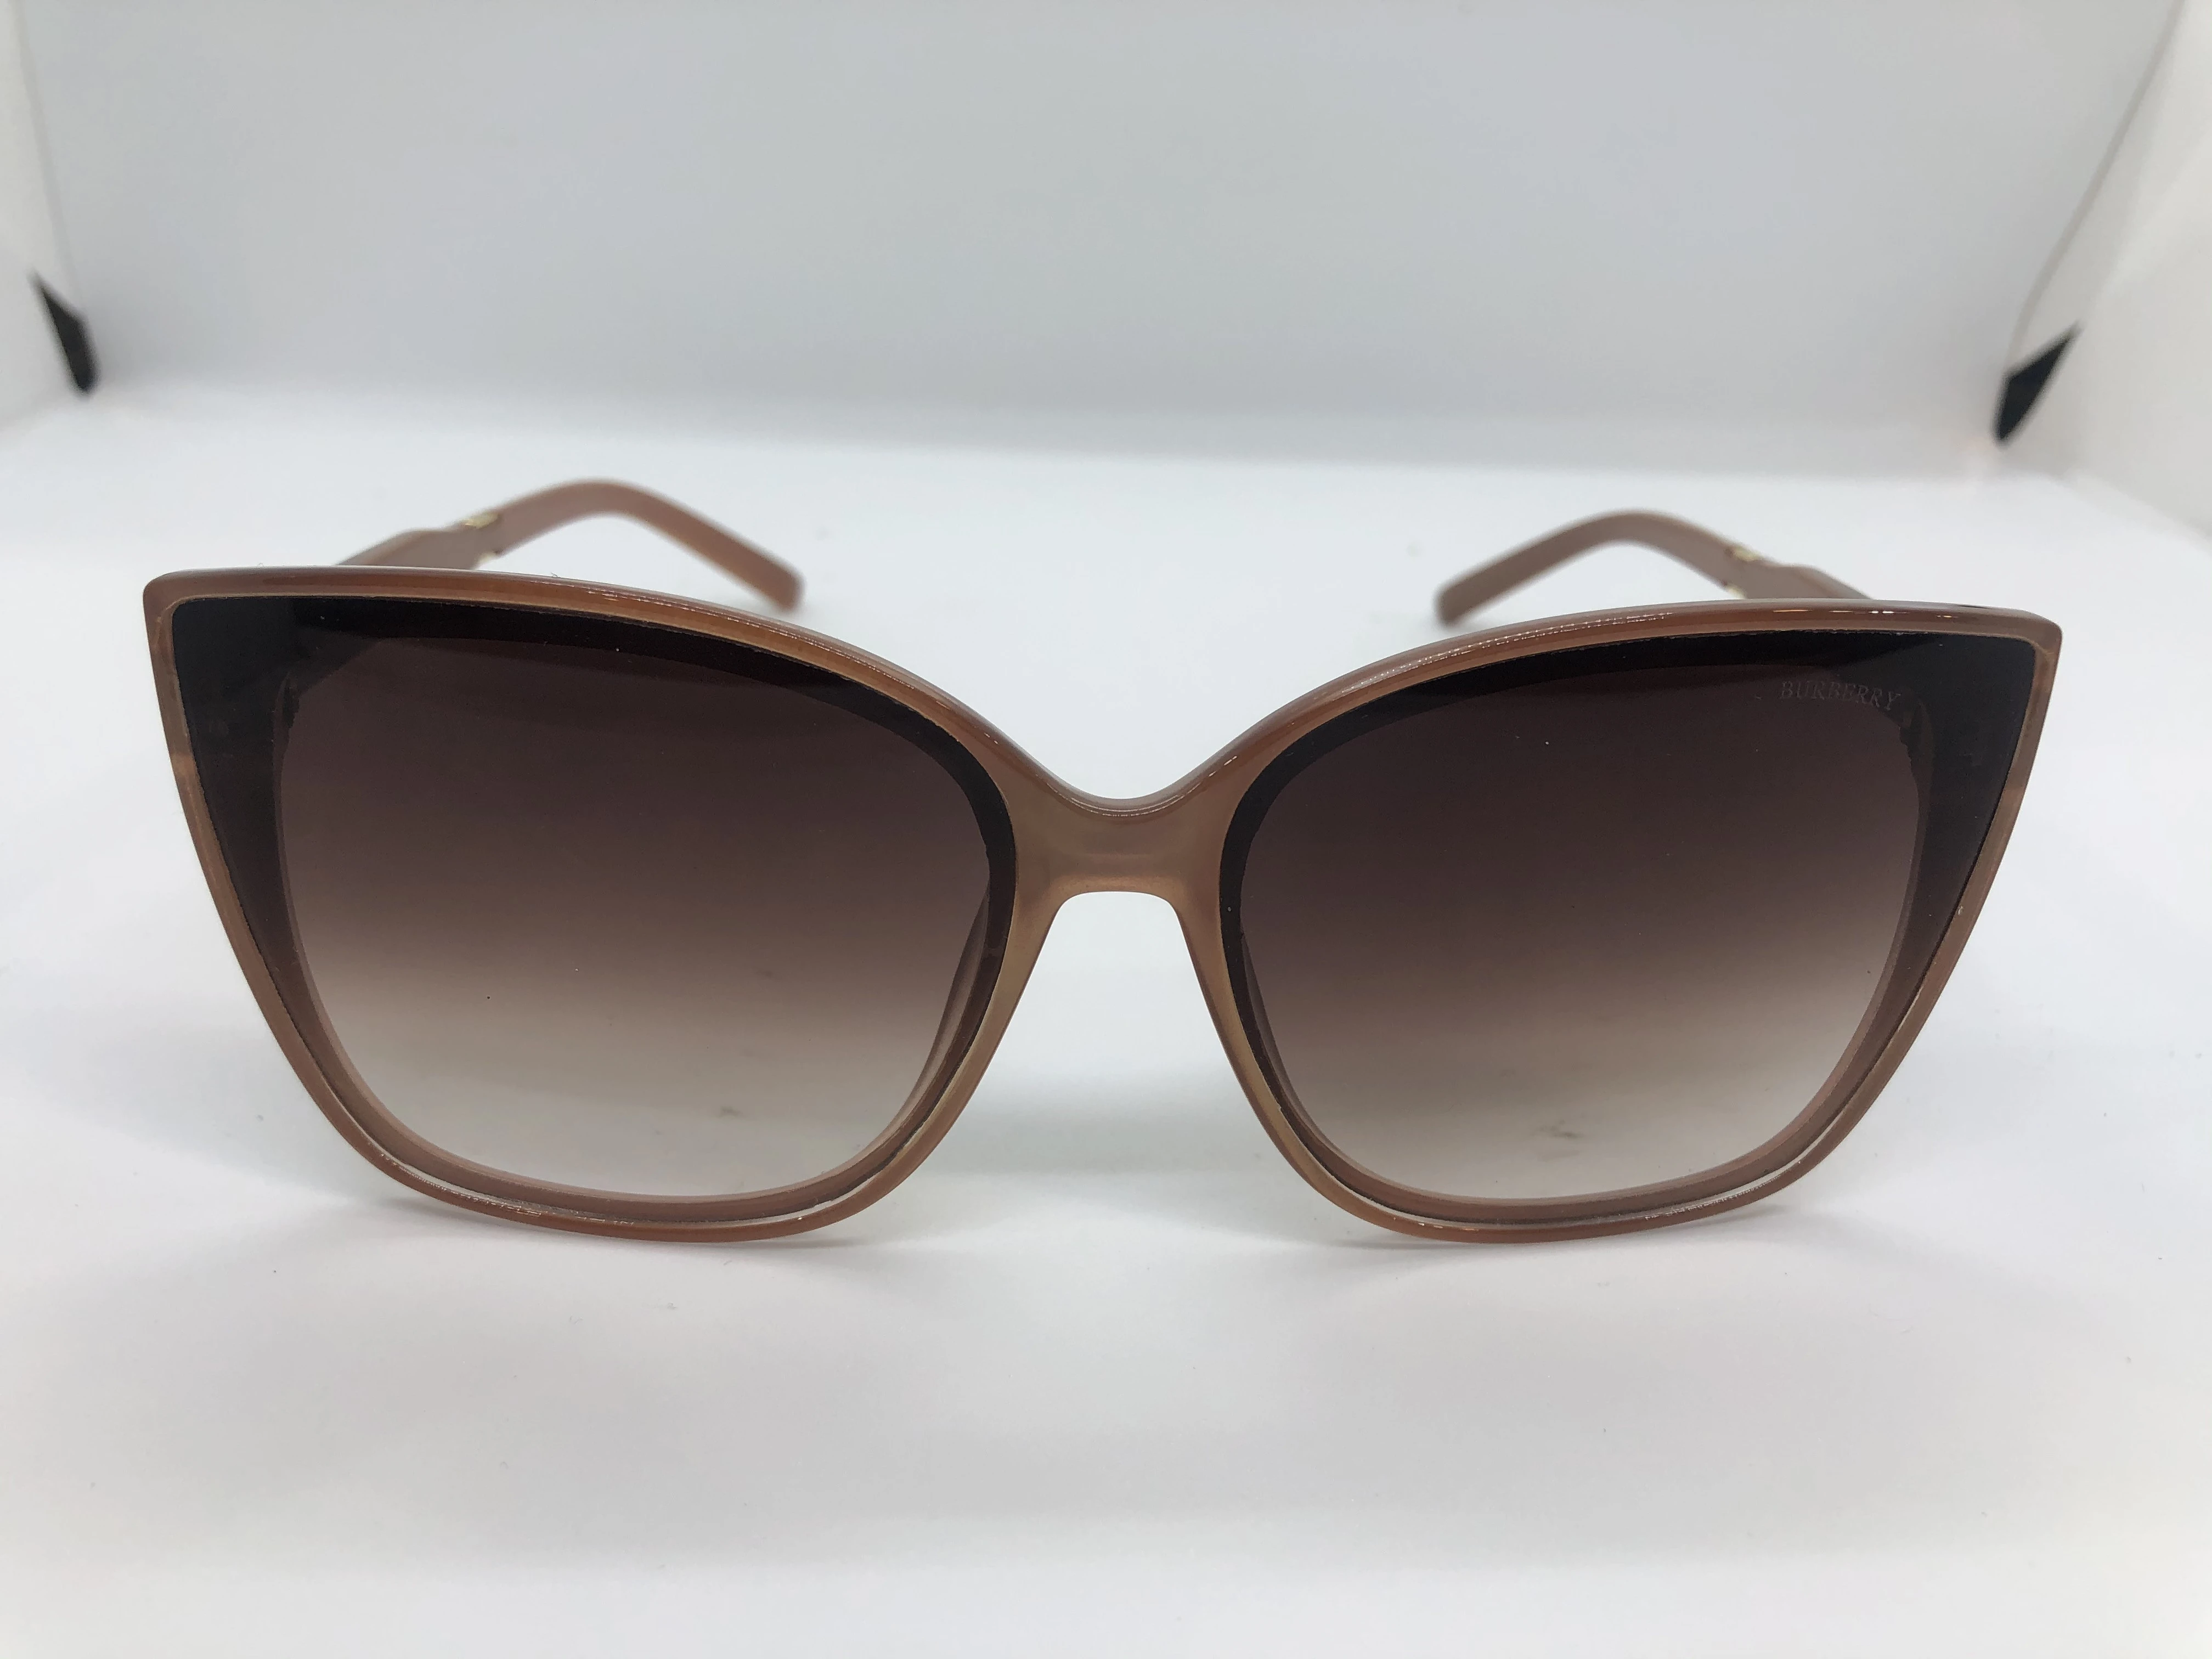 Sunglasses - from Burberry - with light brown polycarbonate frames - light brown gradient lenses - and light brown polycarbonate arms - with the brand logo - Womens